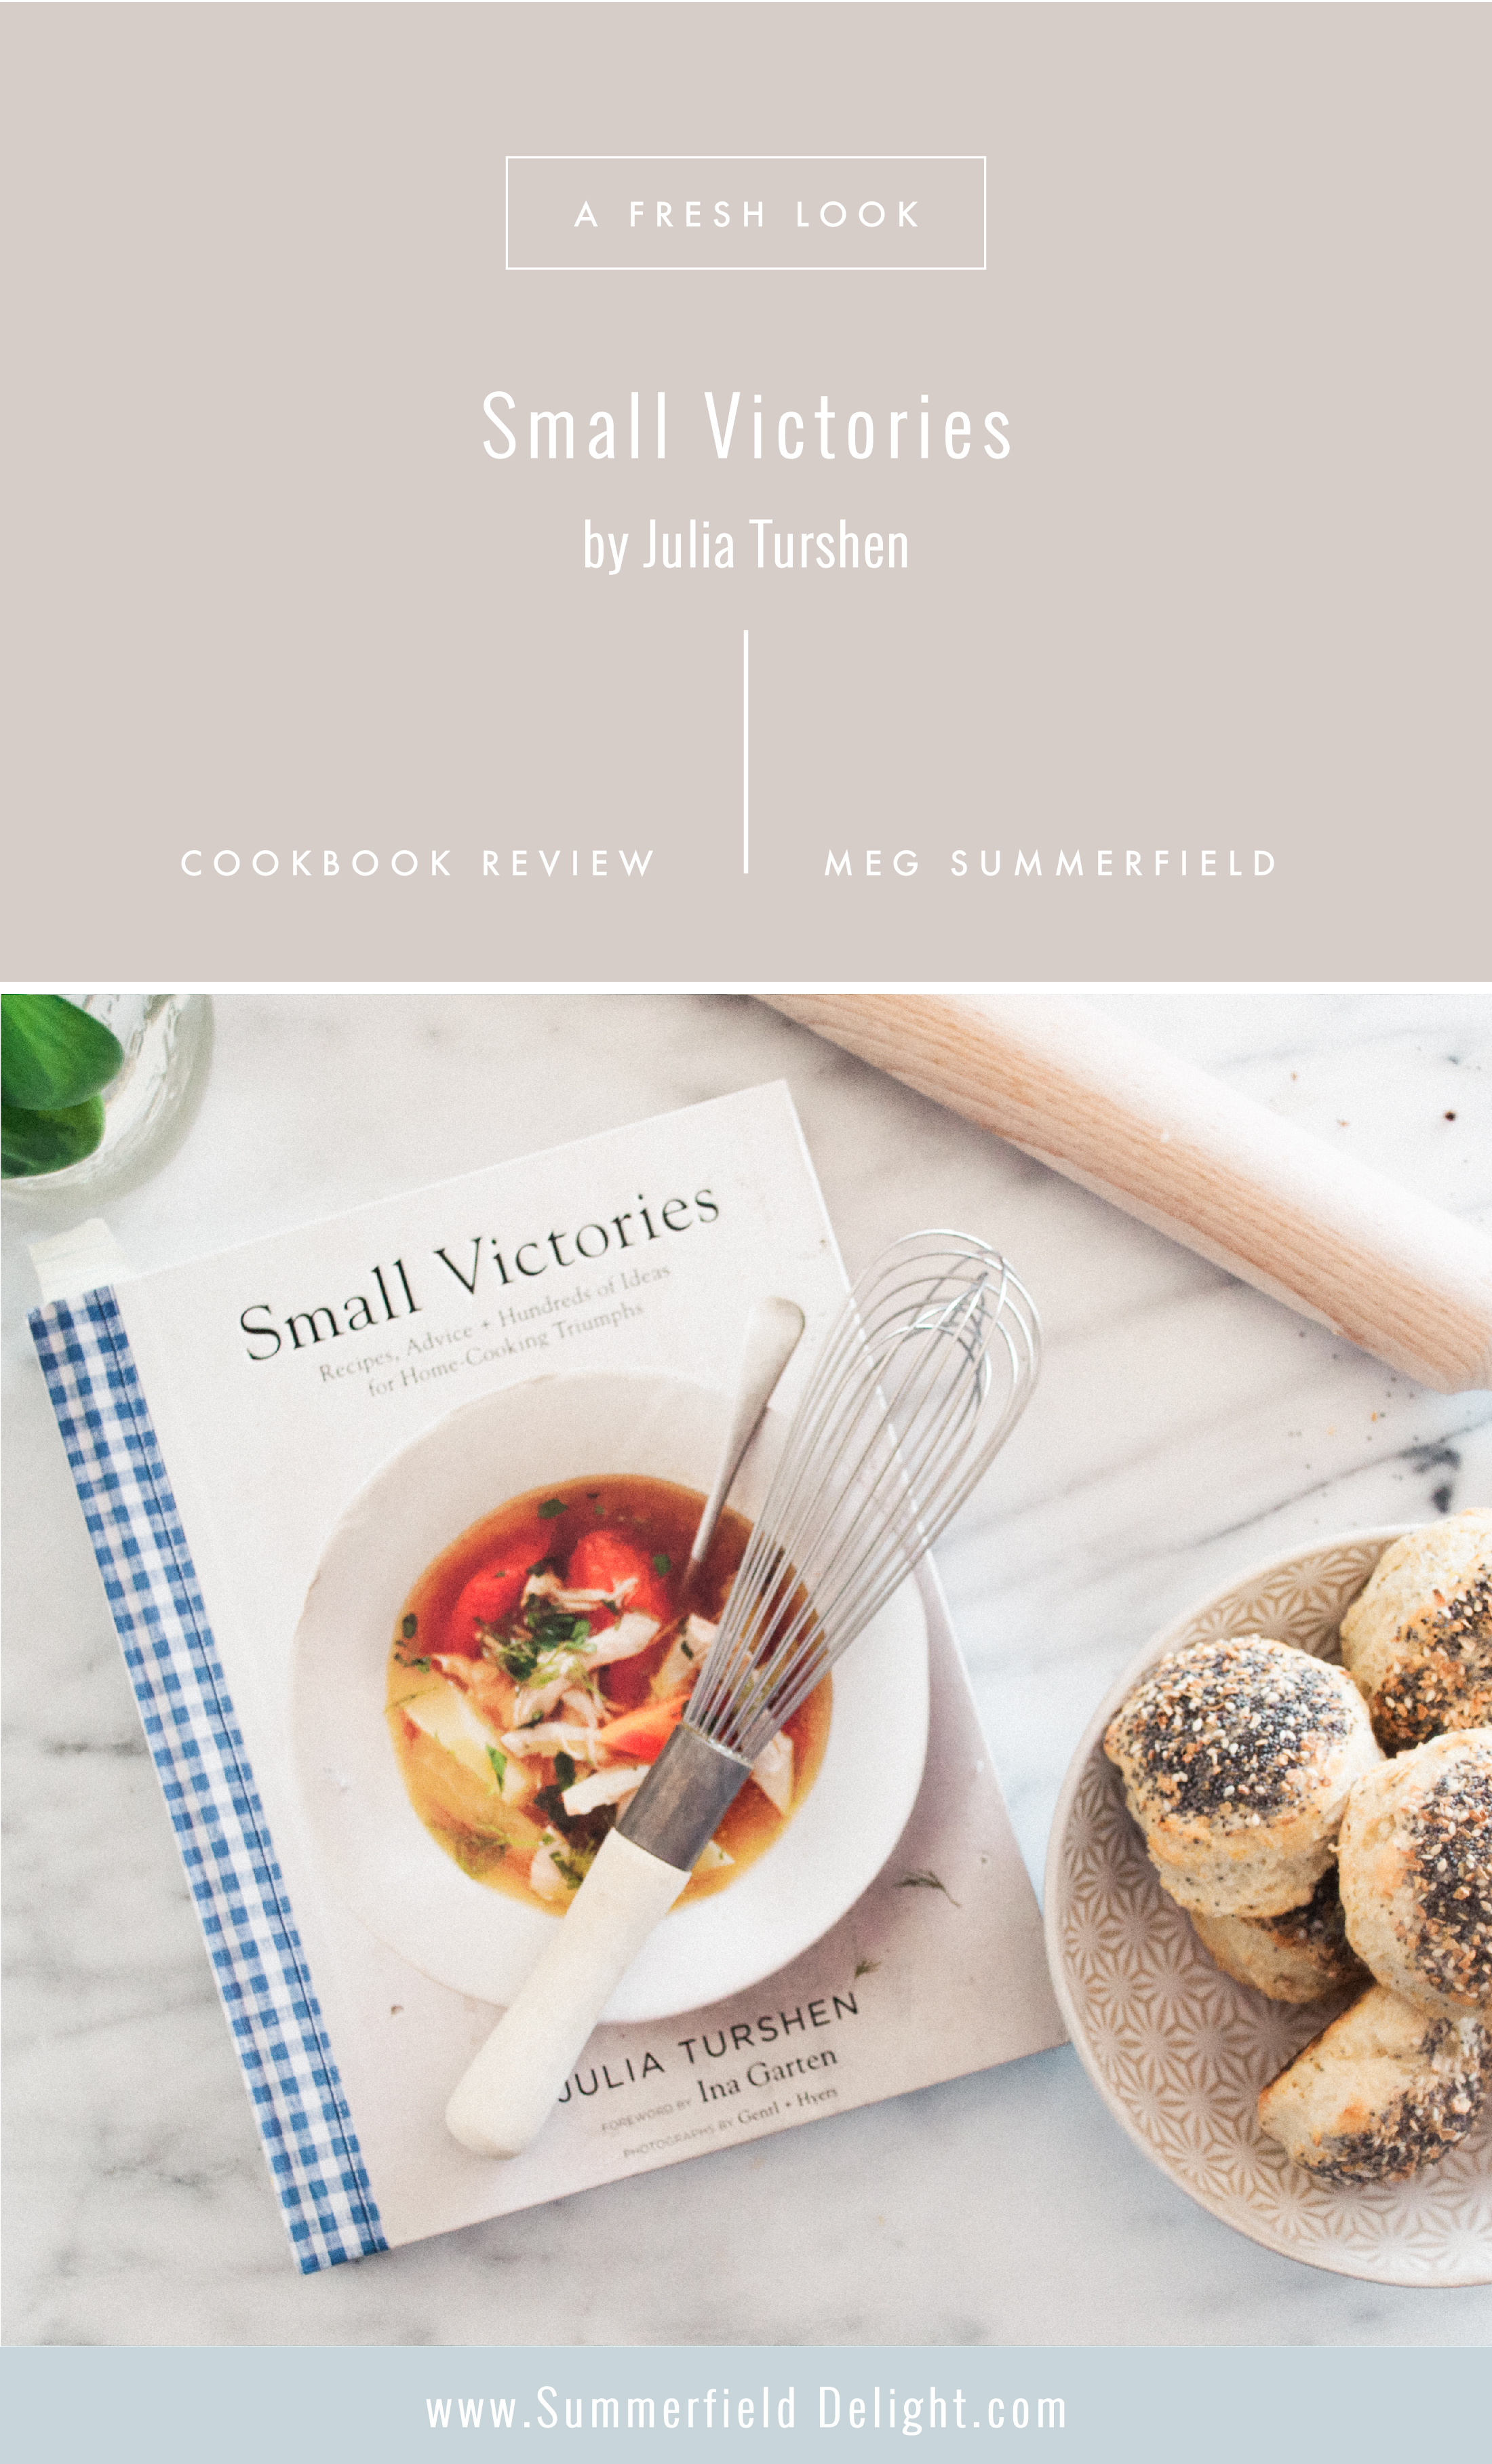 Small Victories: Recipes, Advice + Hundreds of Ideas for Home Cooking Triumphs (Best Simple Recipes, Simple Cookbook Ideas, Cooking Techniques Book) [Book]